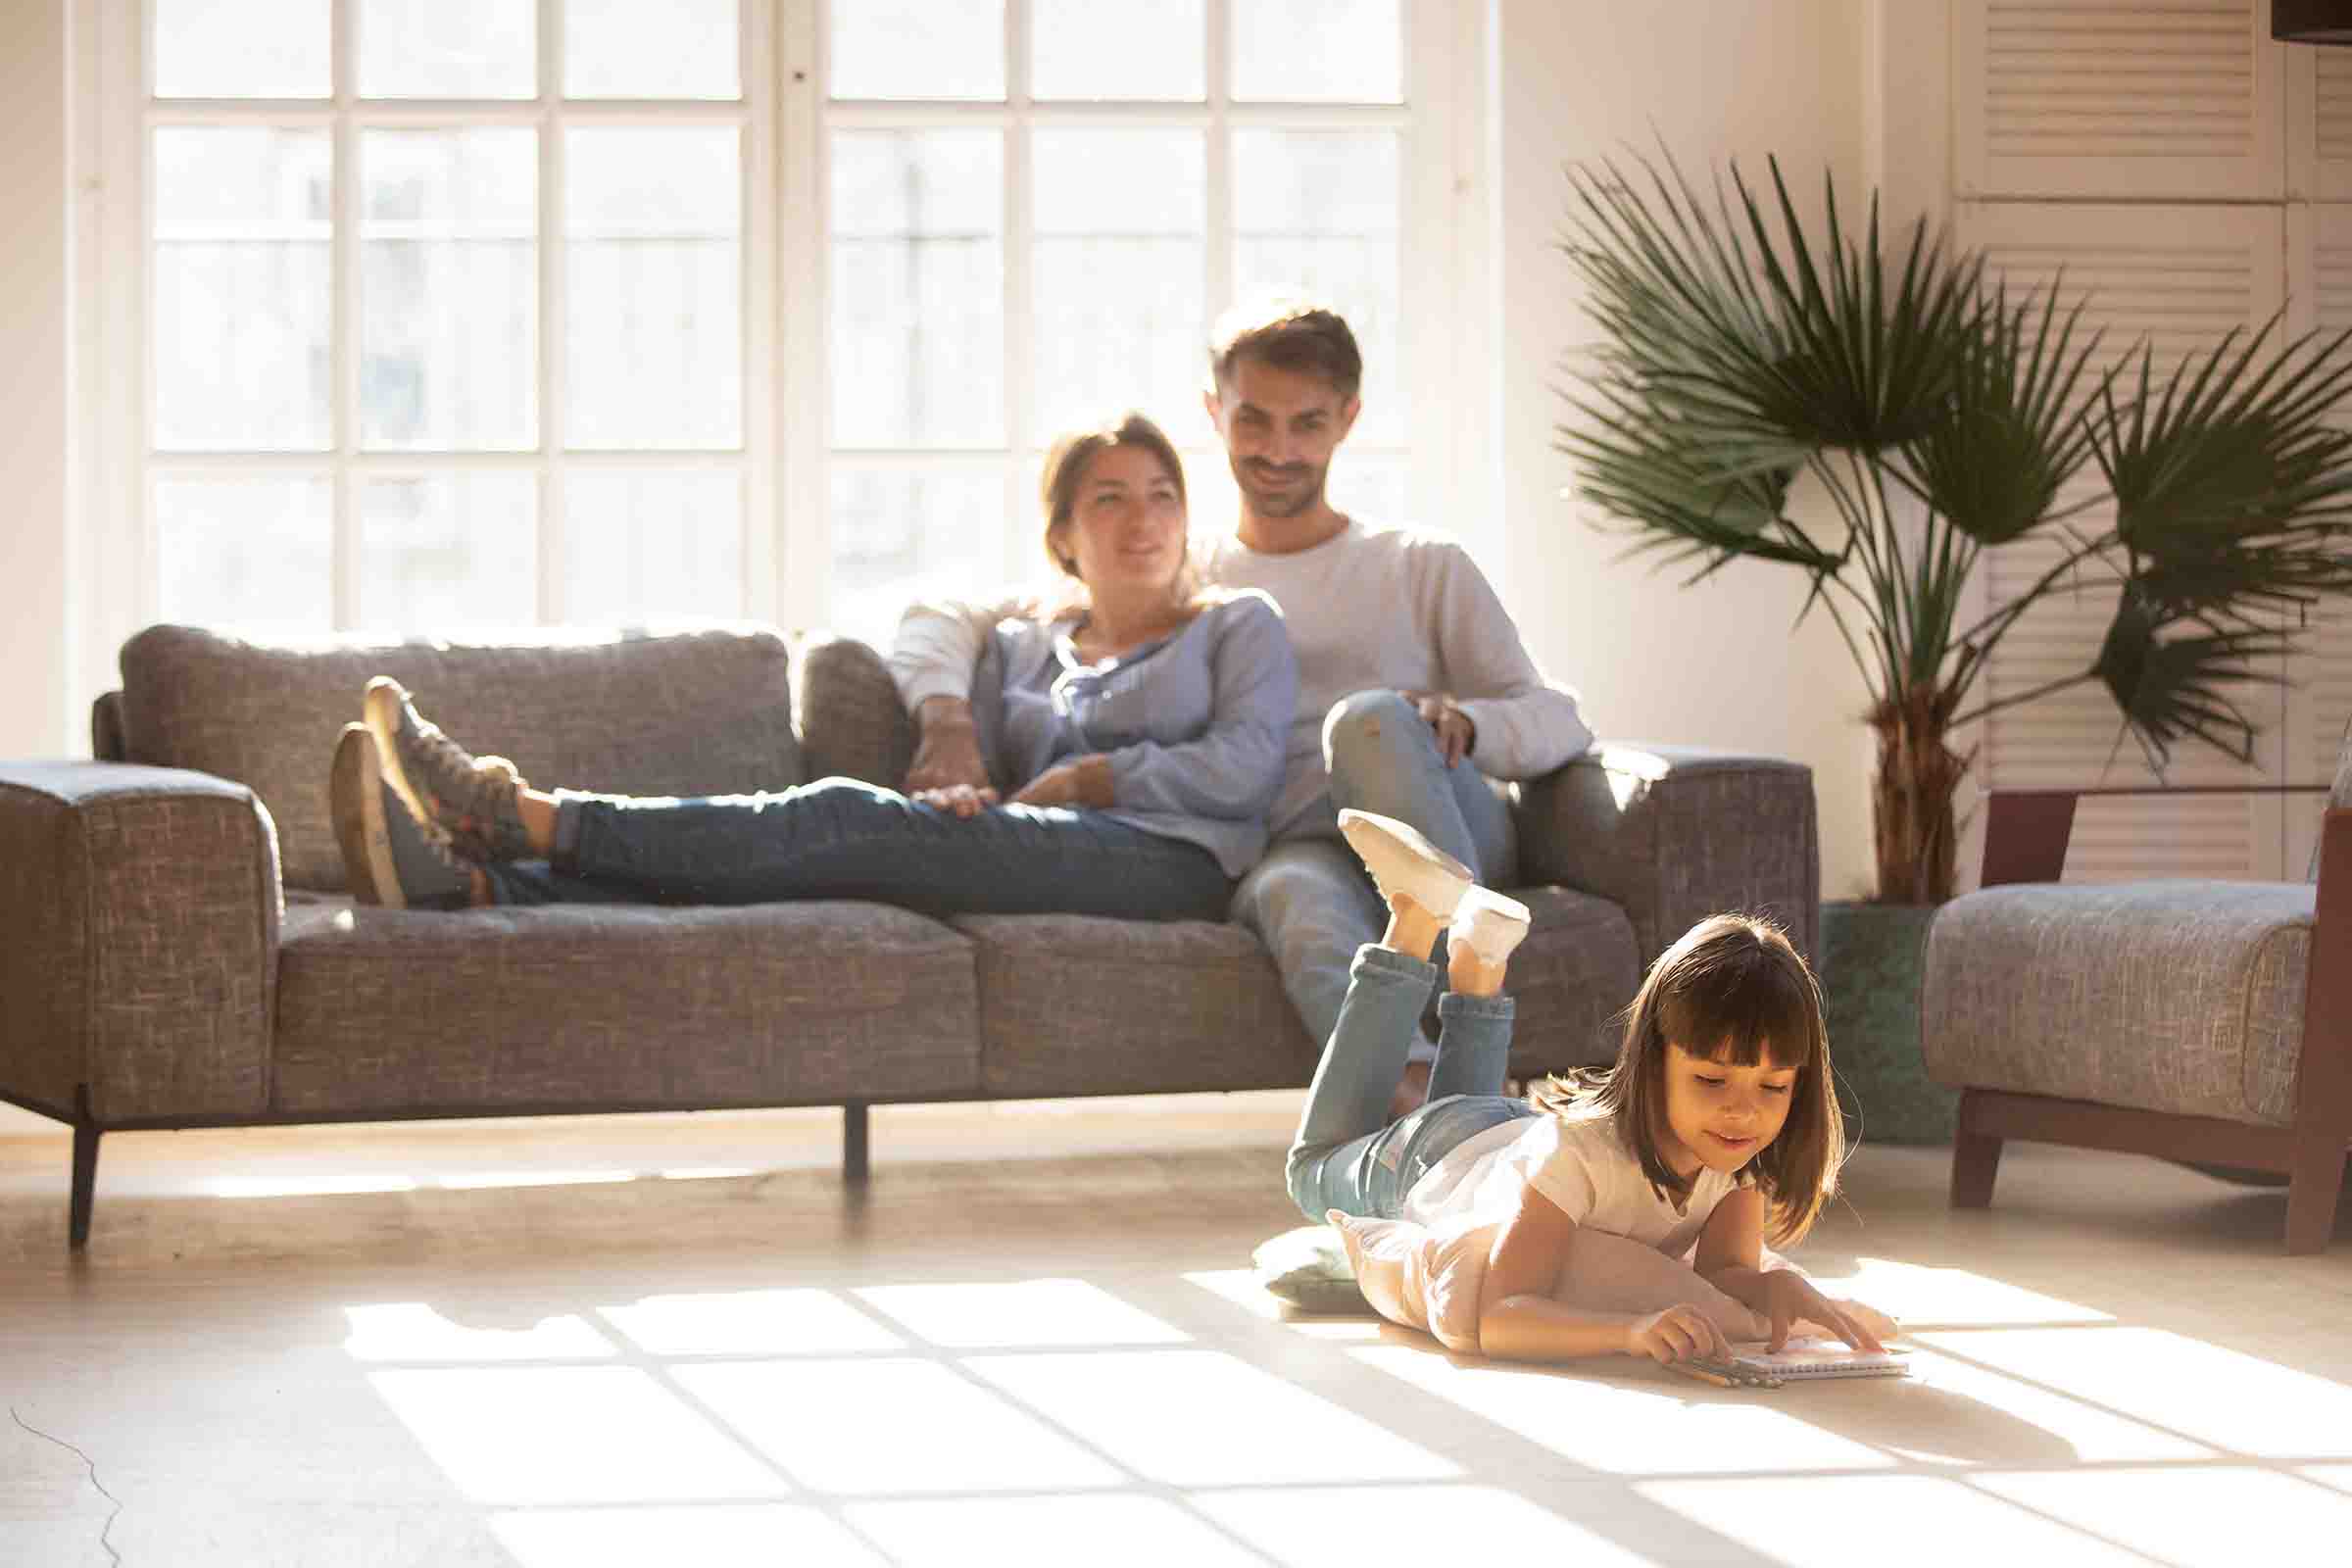 Family enjoying warmth on couch